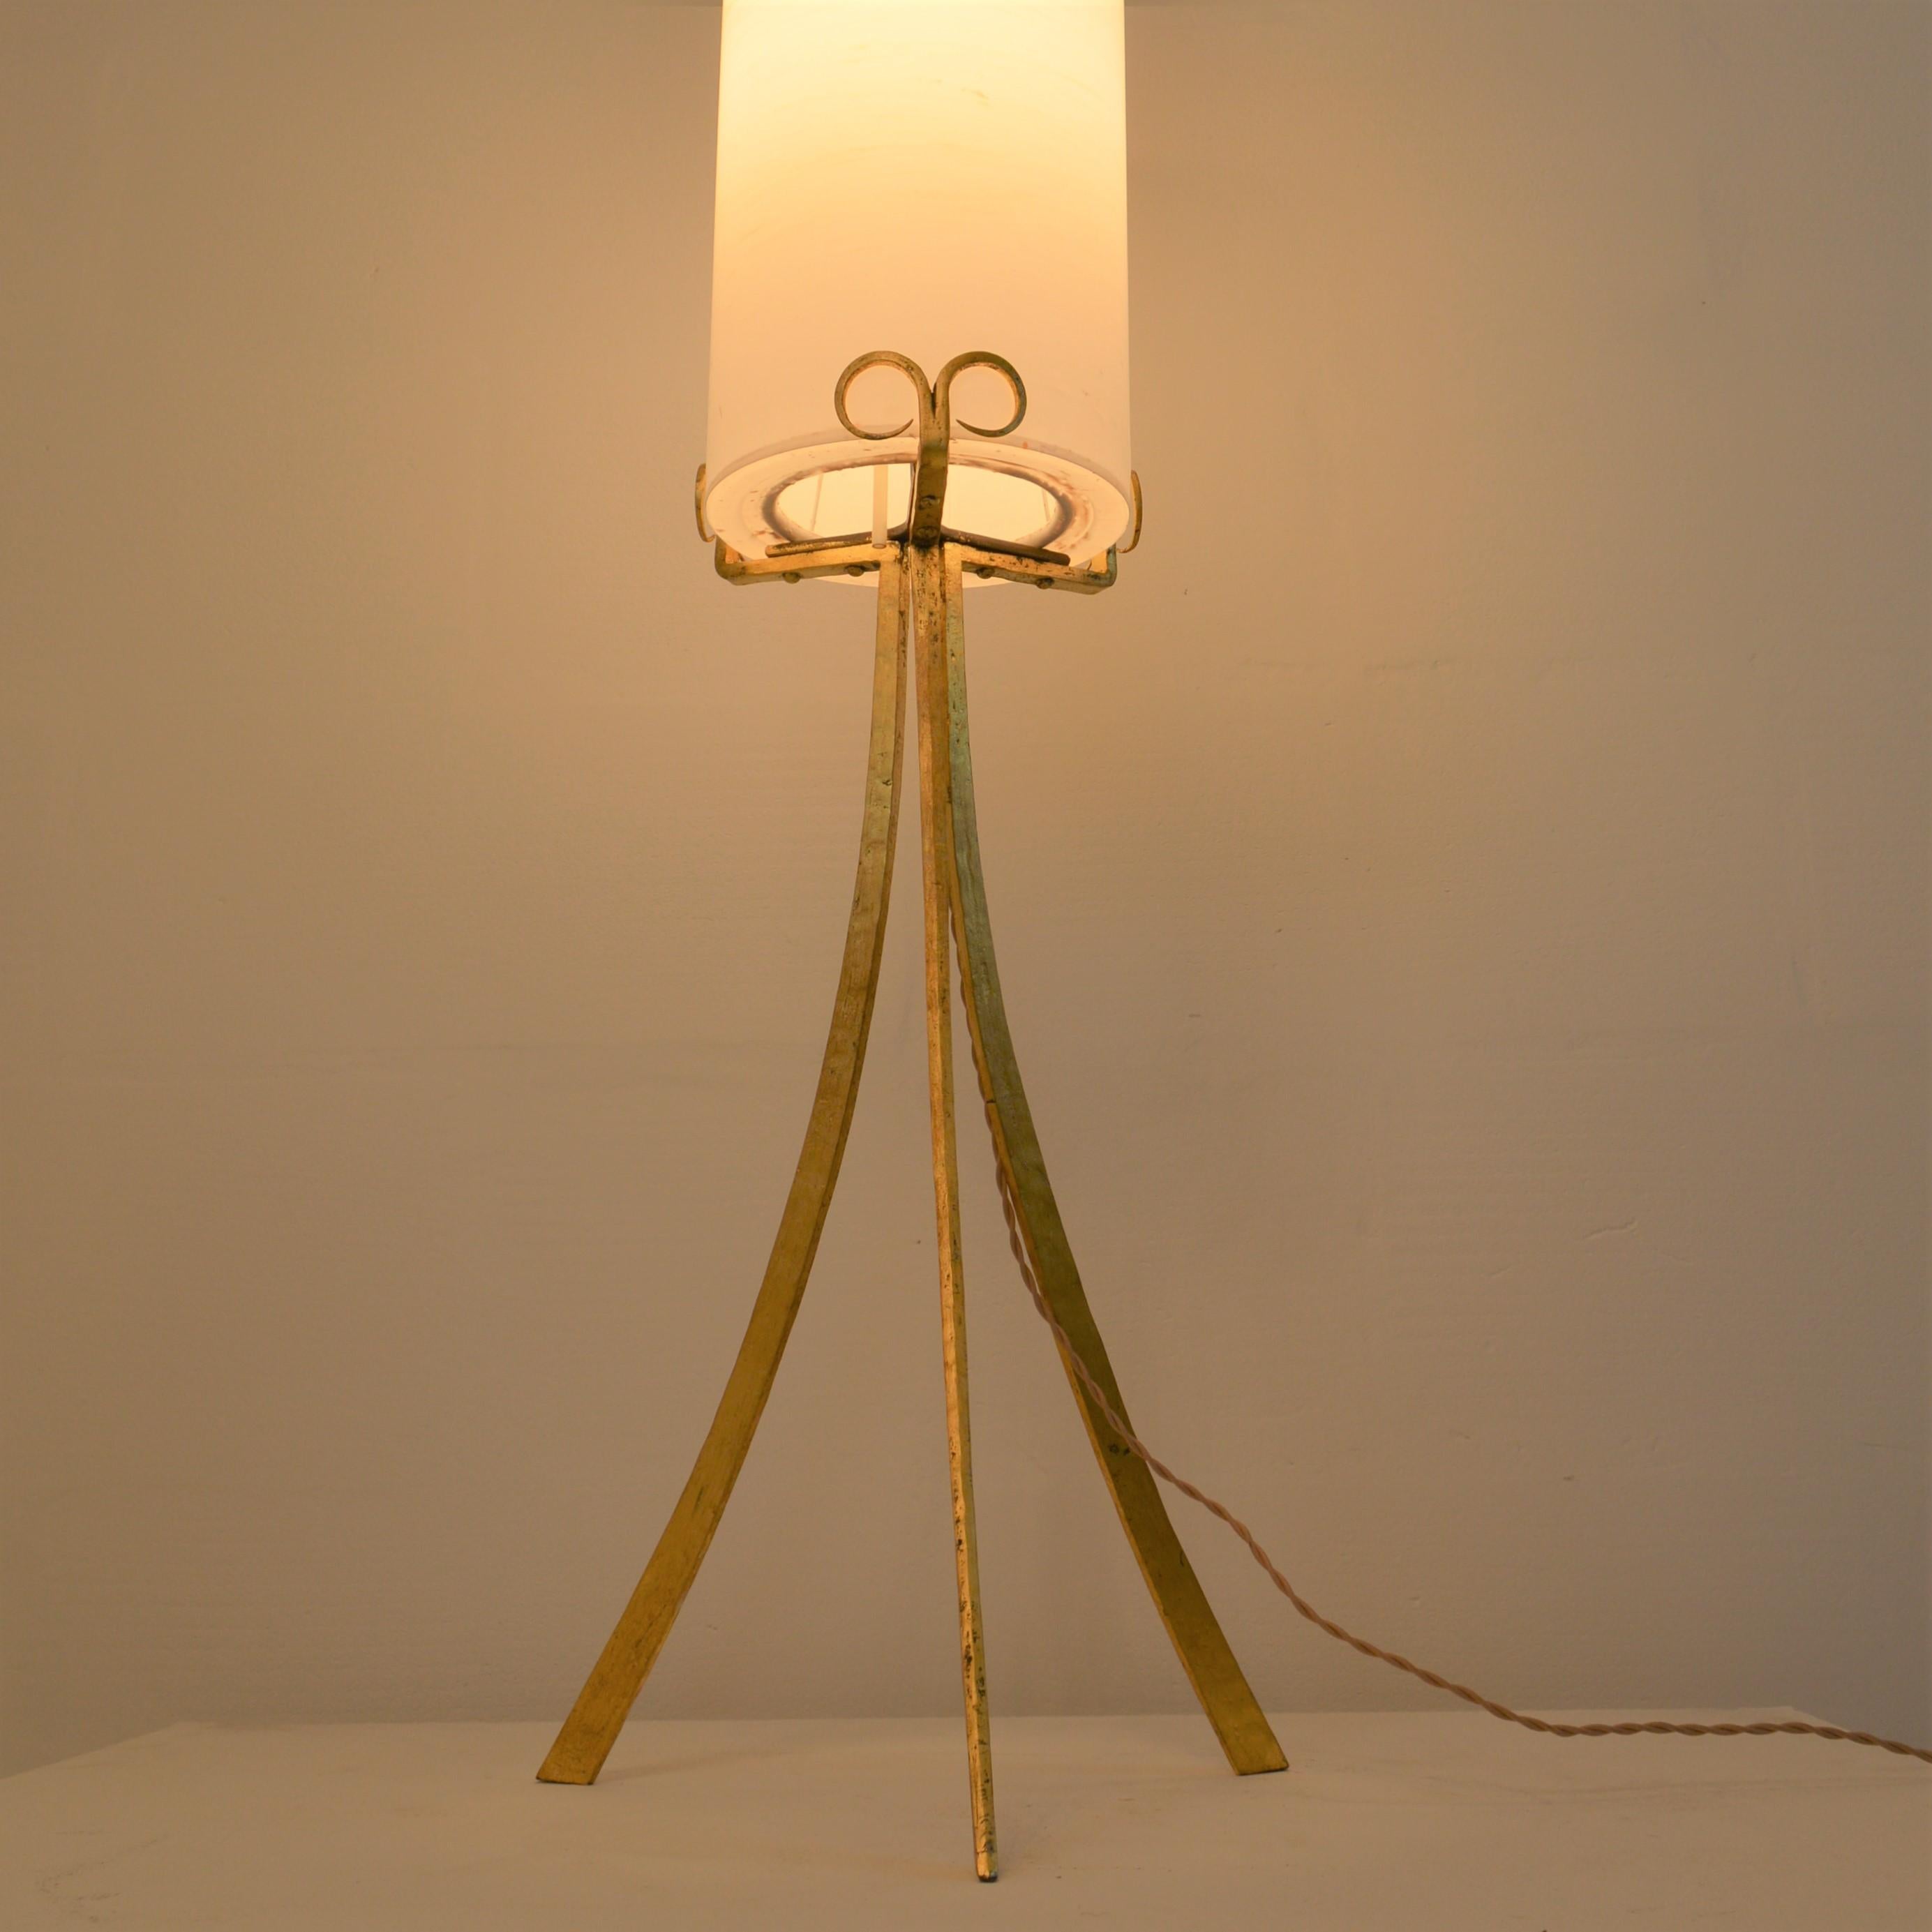 Rare wrought iron gilded floor lamp in a very good condition. The lamp has been rewired.